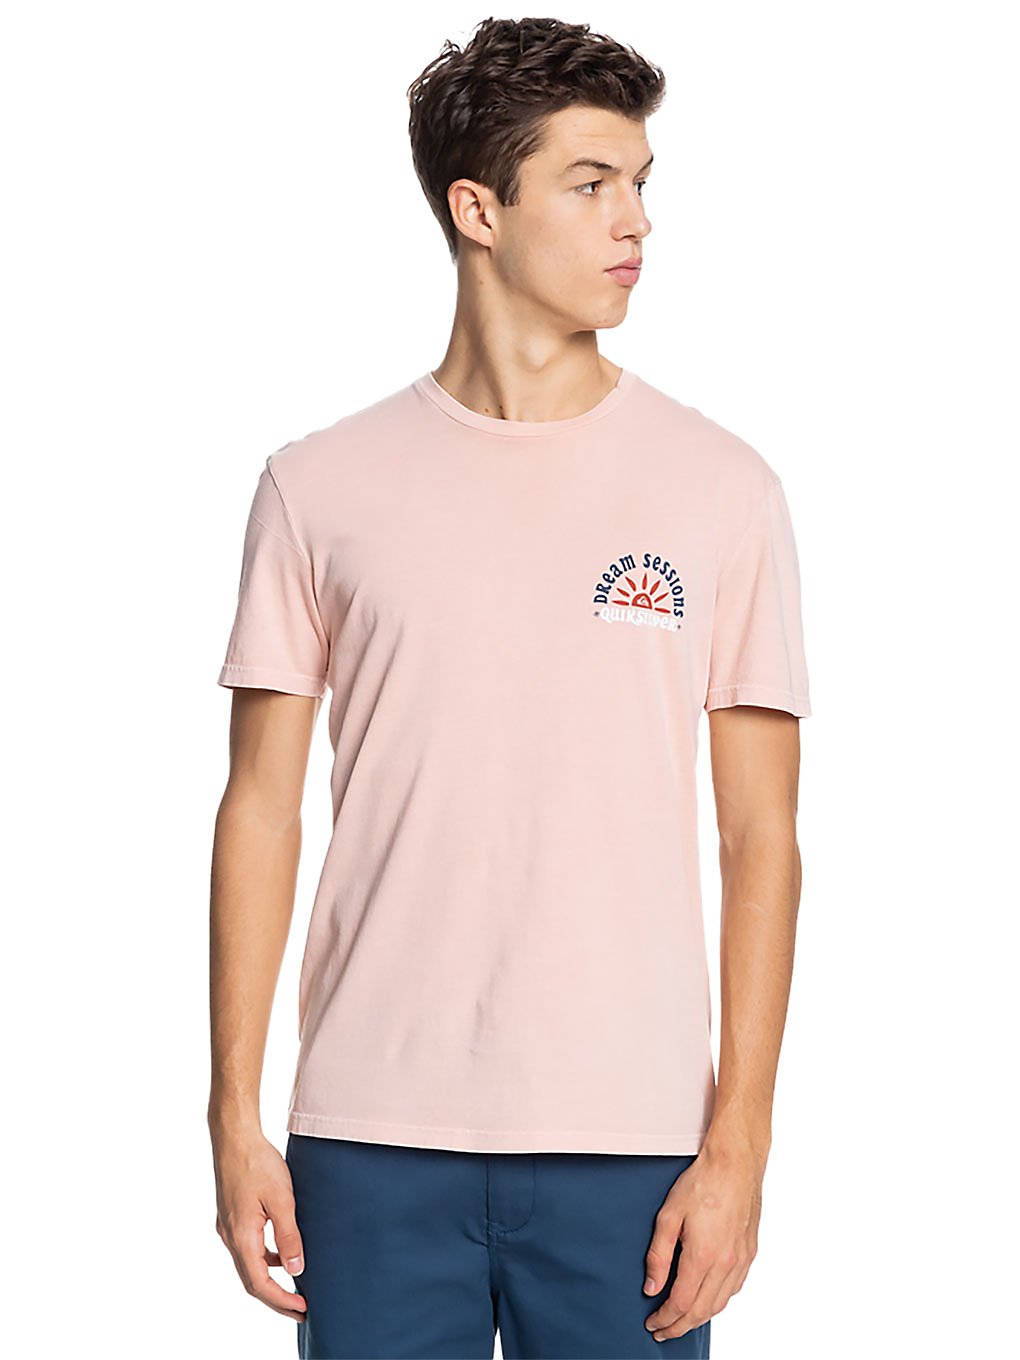 Quiksilver Dream Sessions T-Shirt misty rose